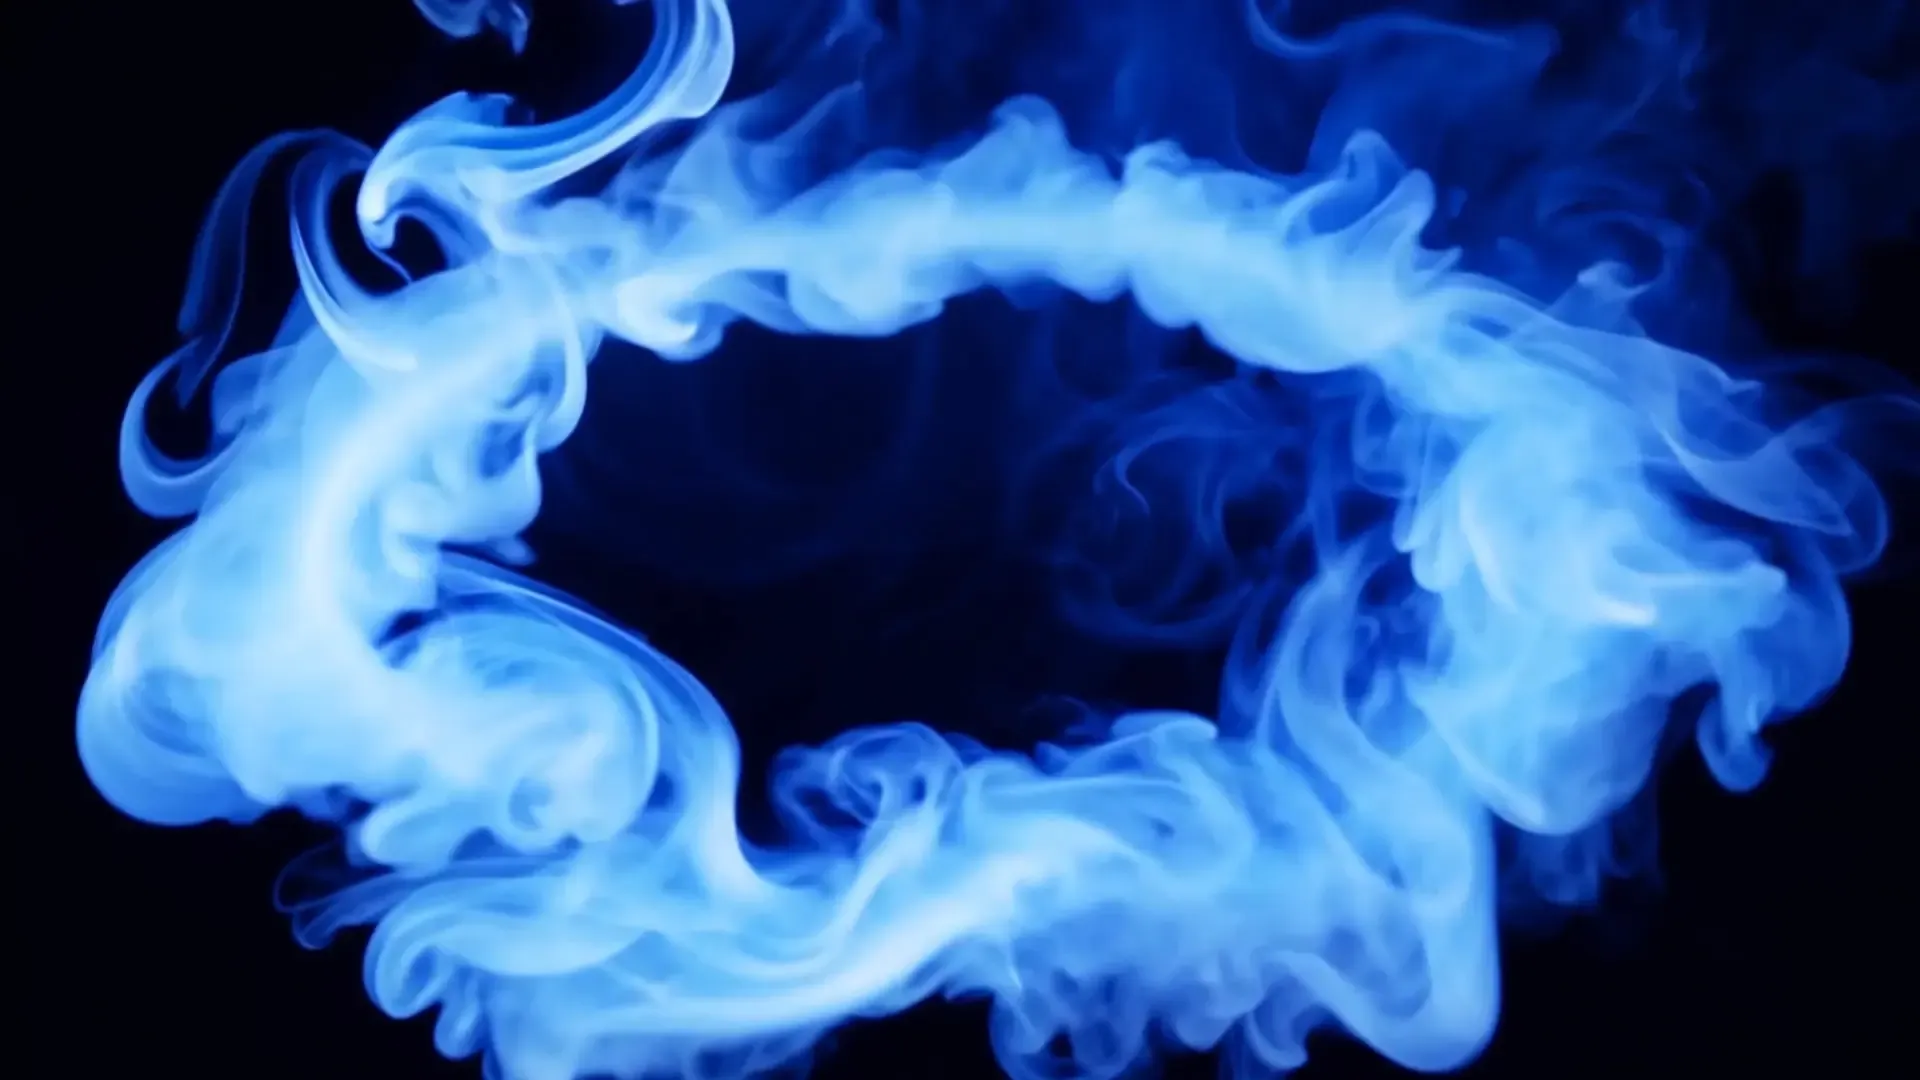 Spectral Smoke Rings for Title Animation Background